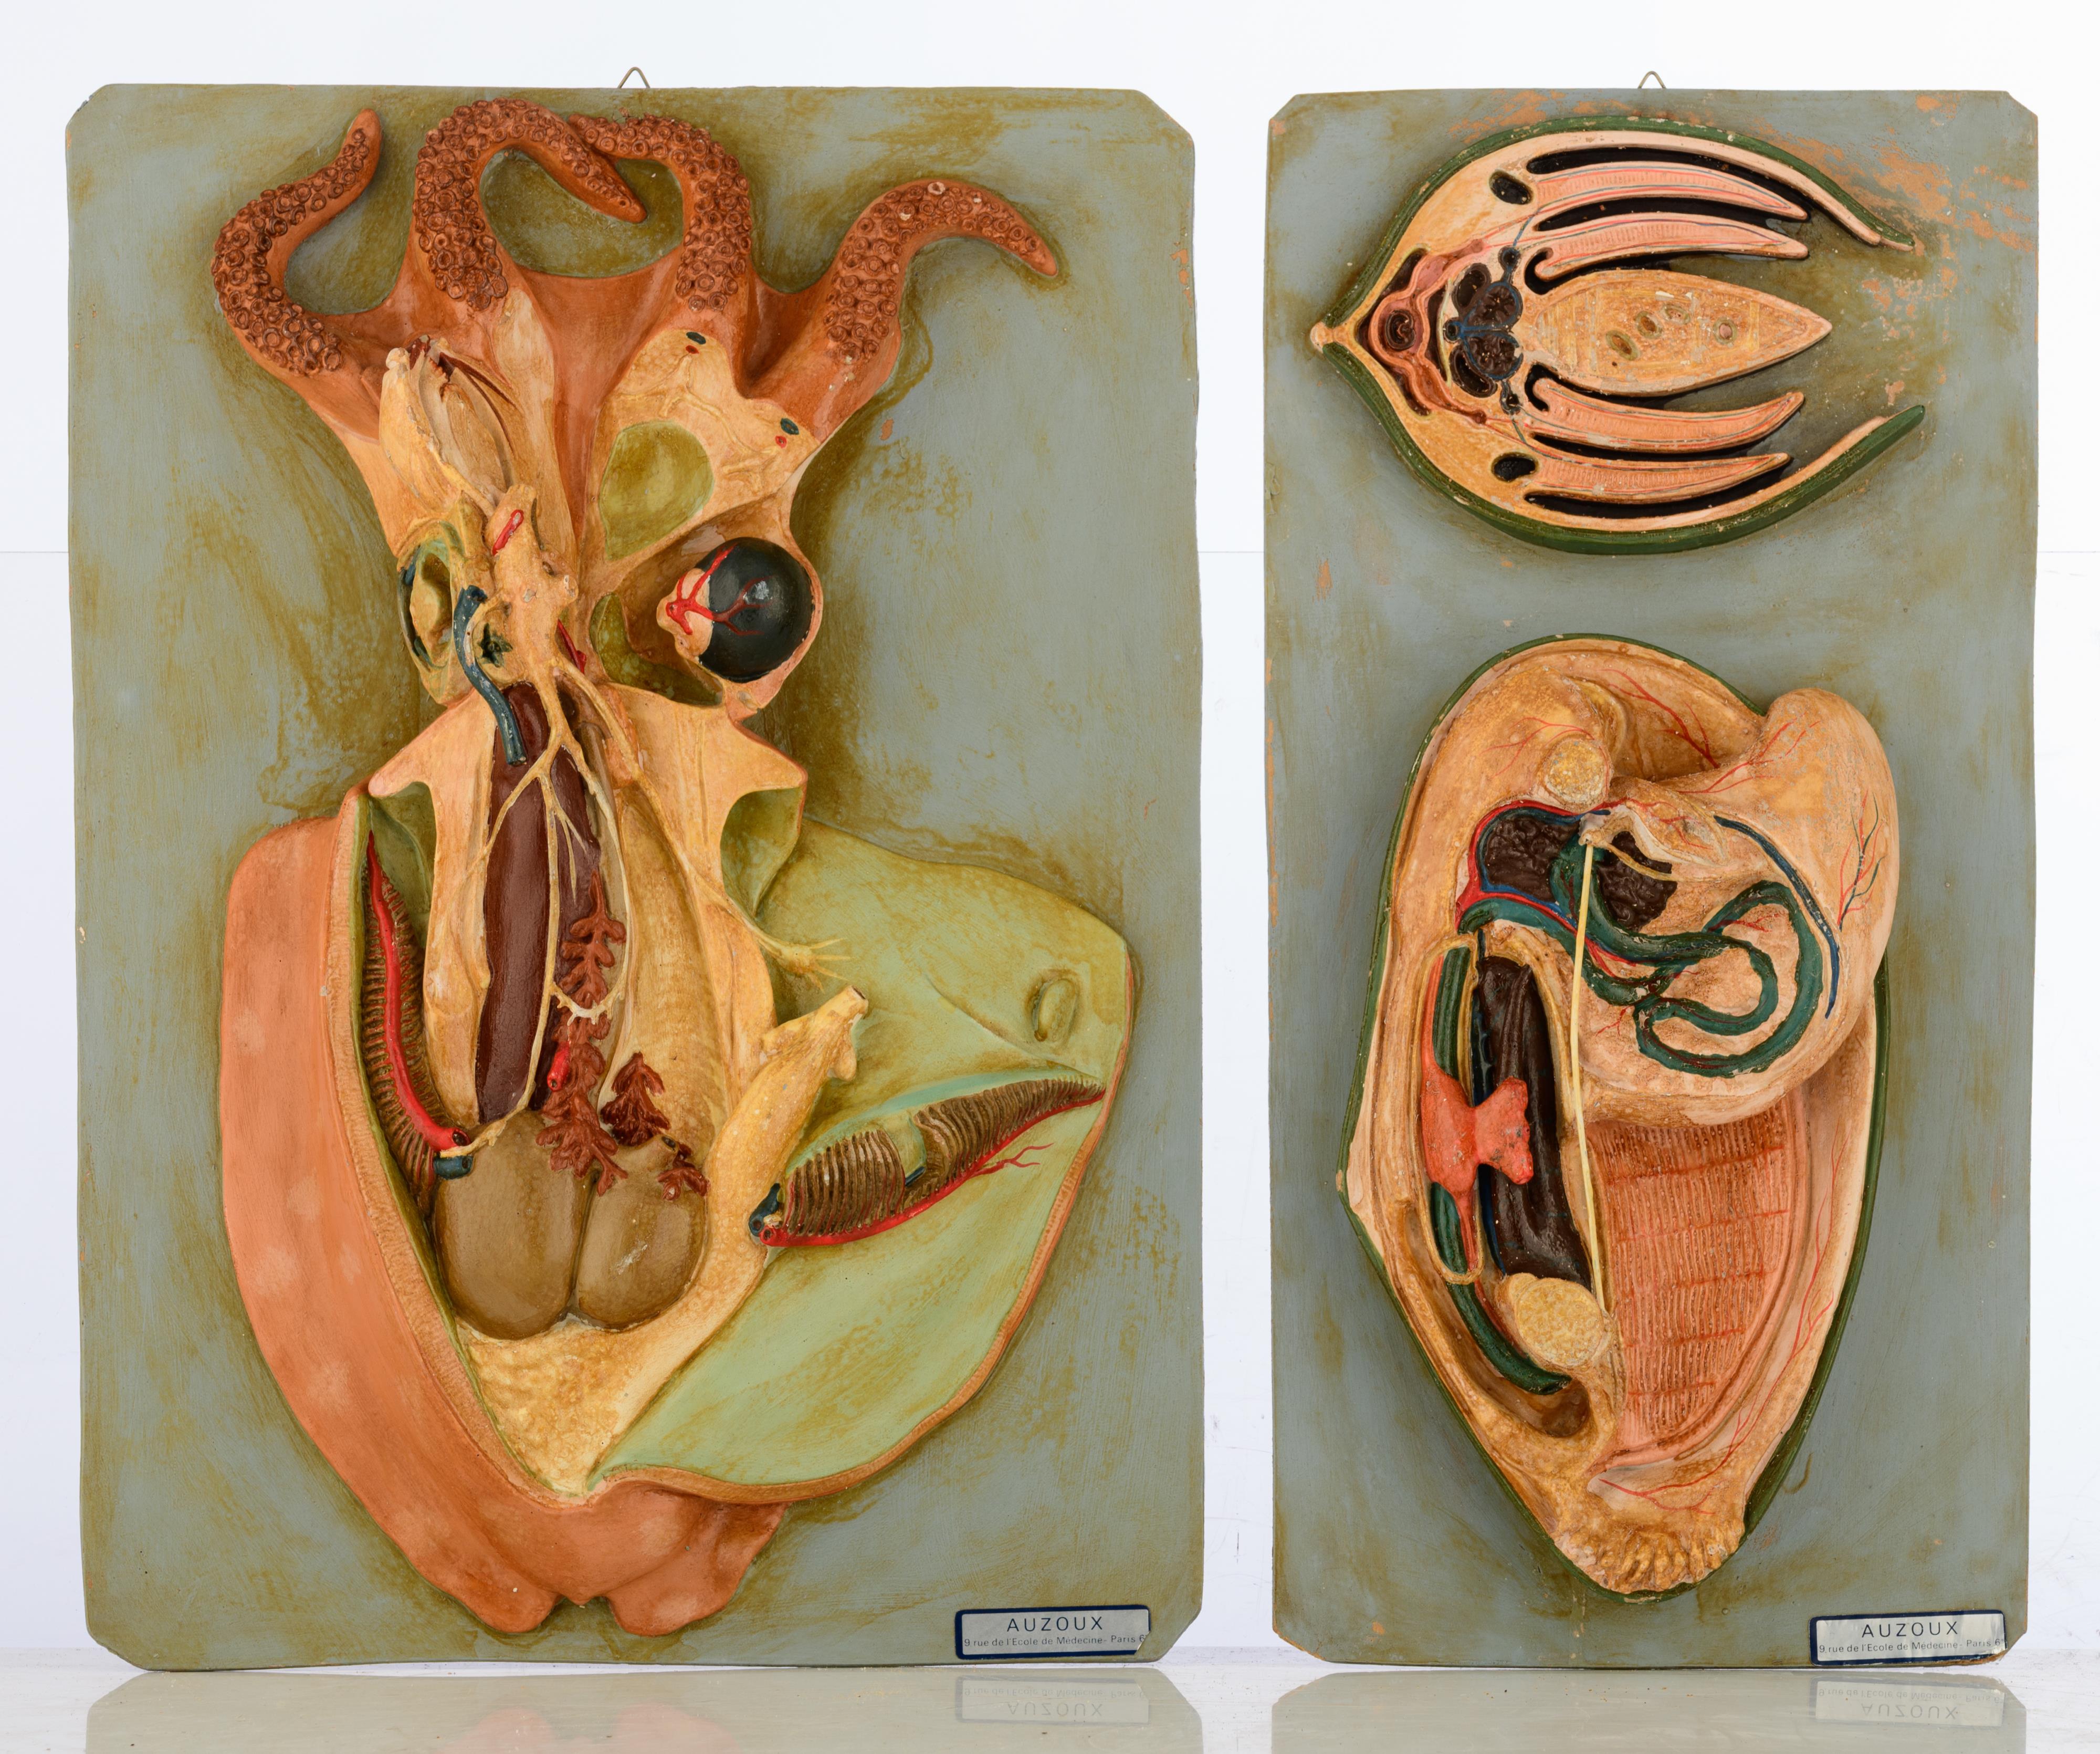 A collection of three anatomical models of nautical animals by Auzoux and one matching piece of a sq - Image 4 of 7